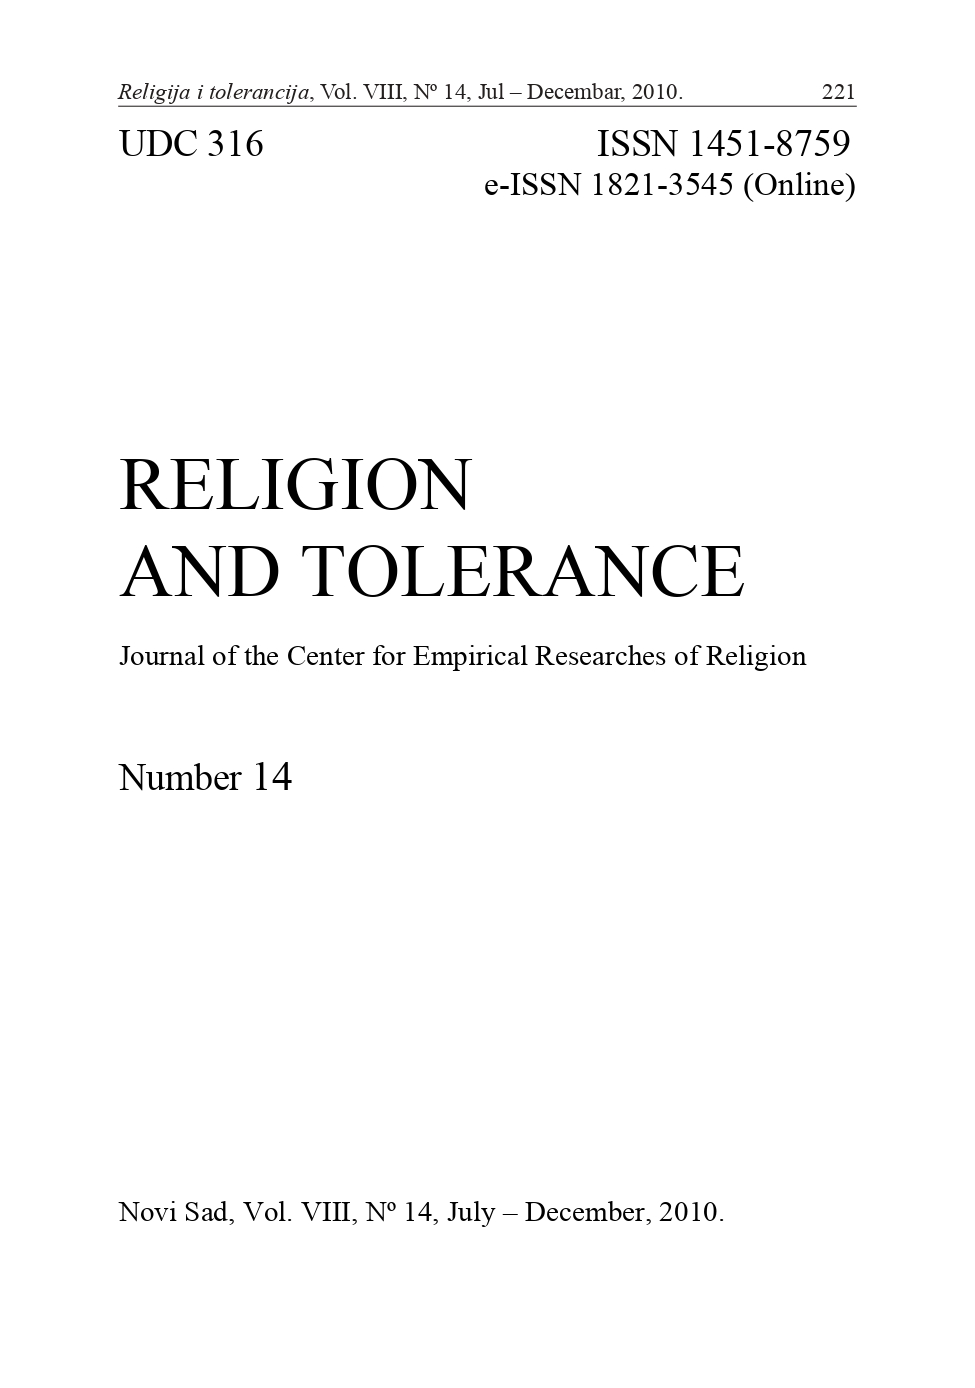 RELIGION AND TERRORISM Cover Image